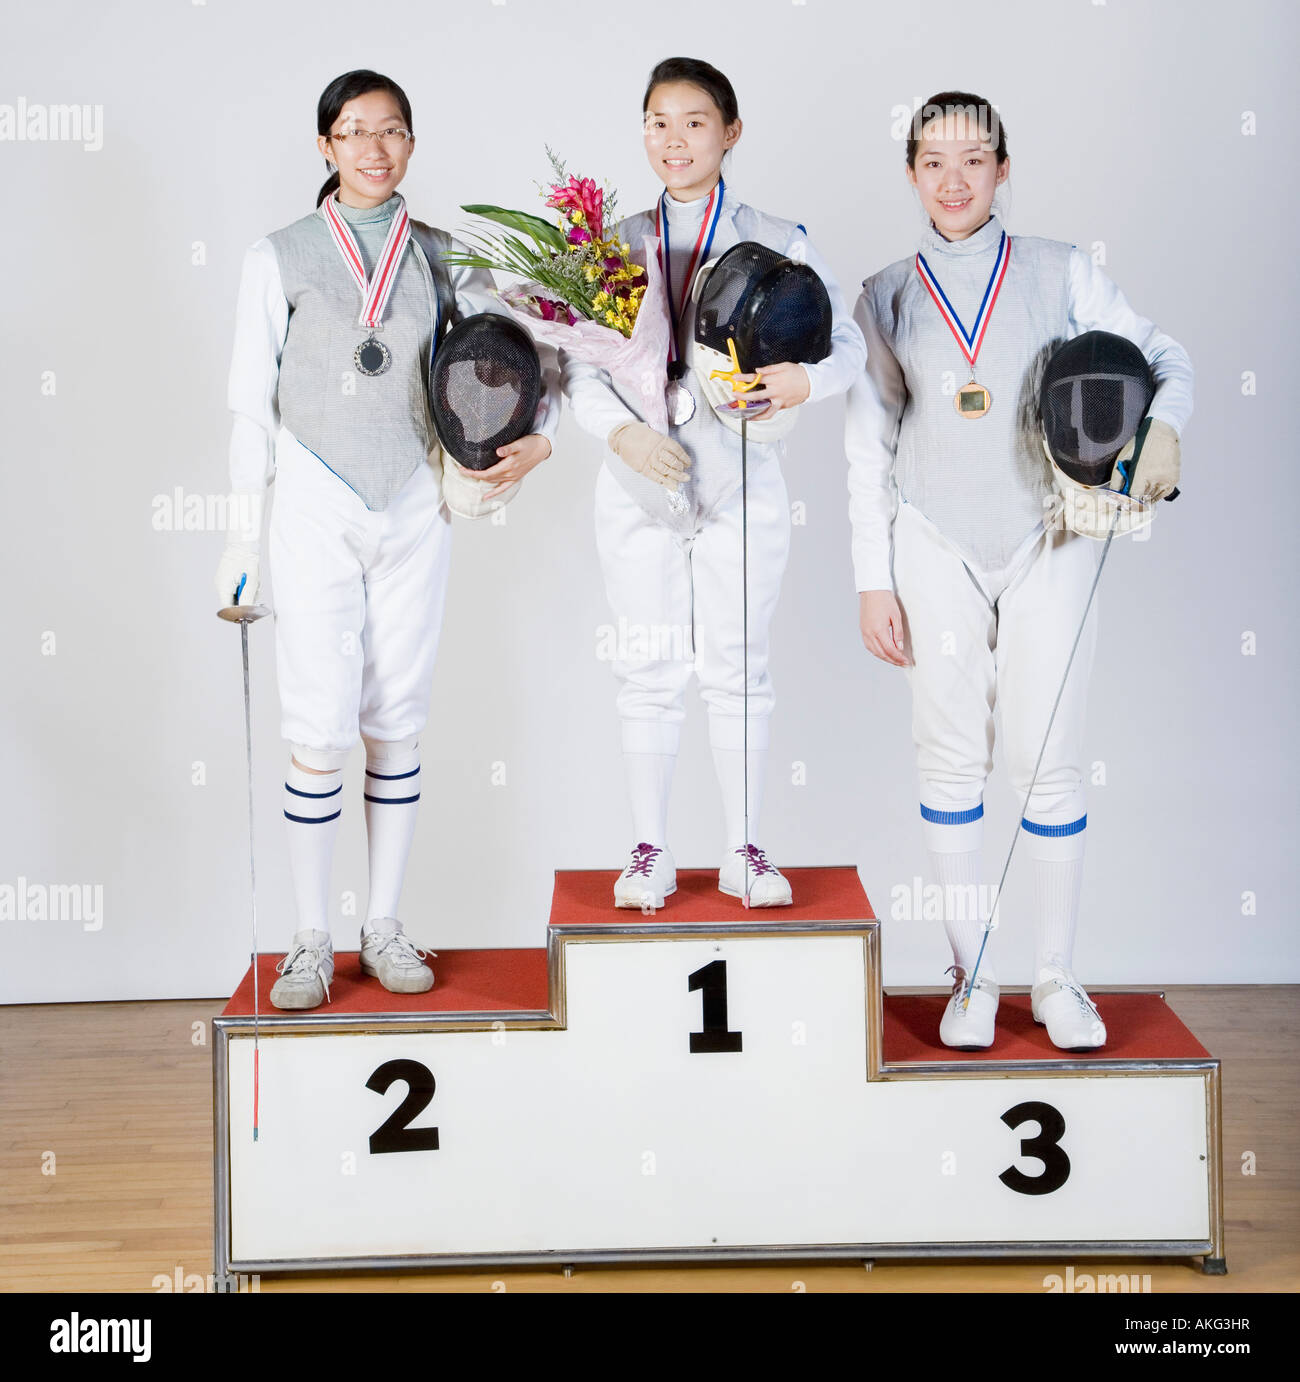 Portrait of three young women in fencing costumes standing on a winner's podium Stock Photo